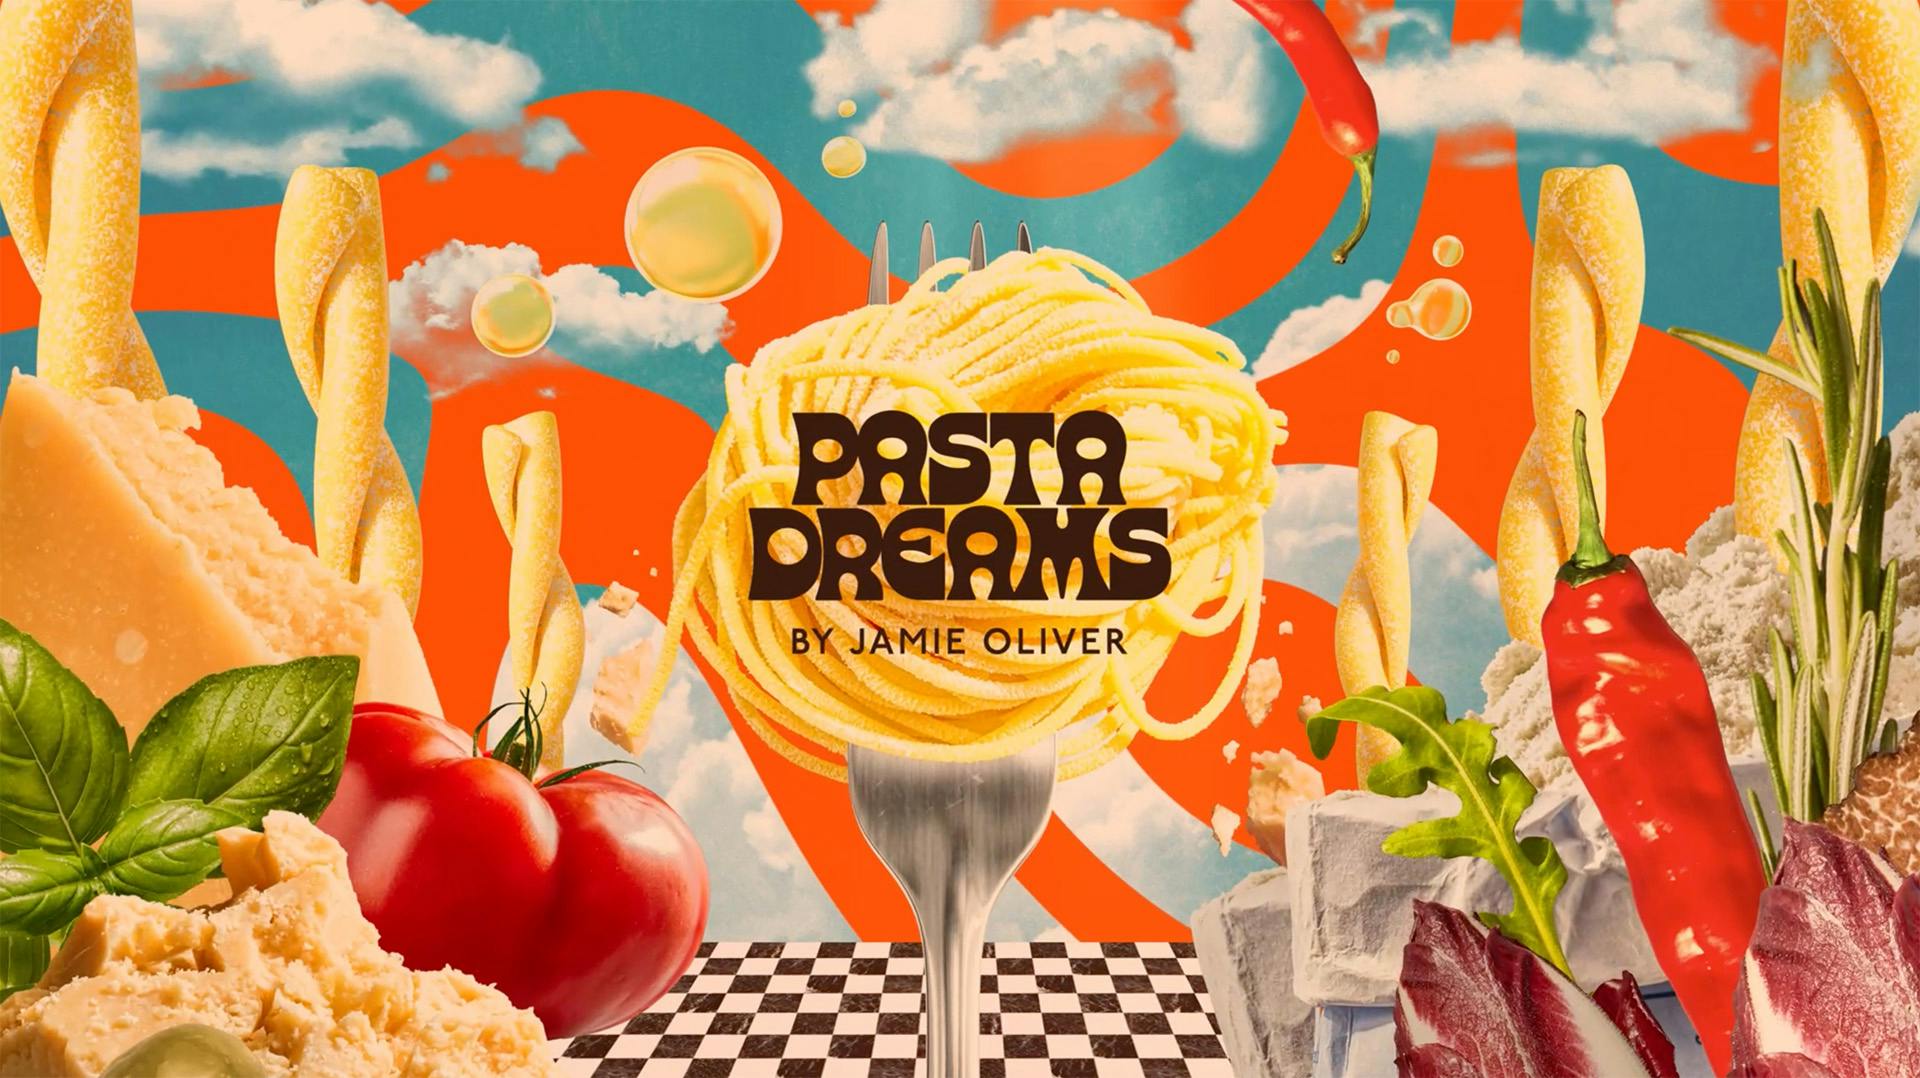 Image shows a collage of ingredients against a psychedelic background and a headline that reads 'Pasta Dreams by Jamie Oliver'